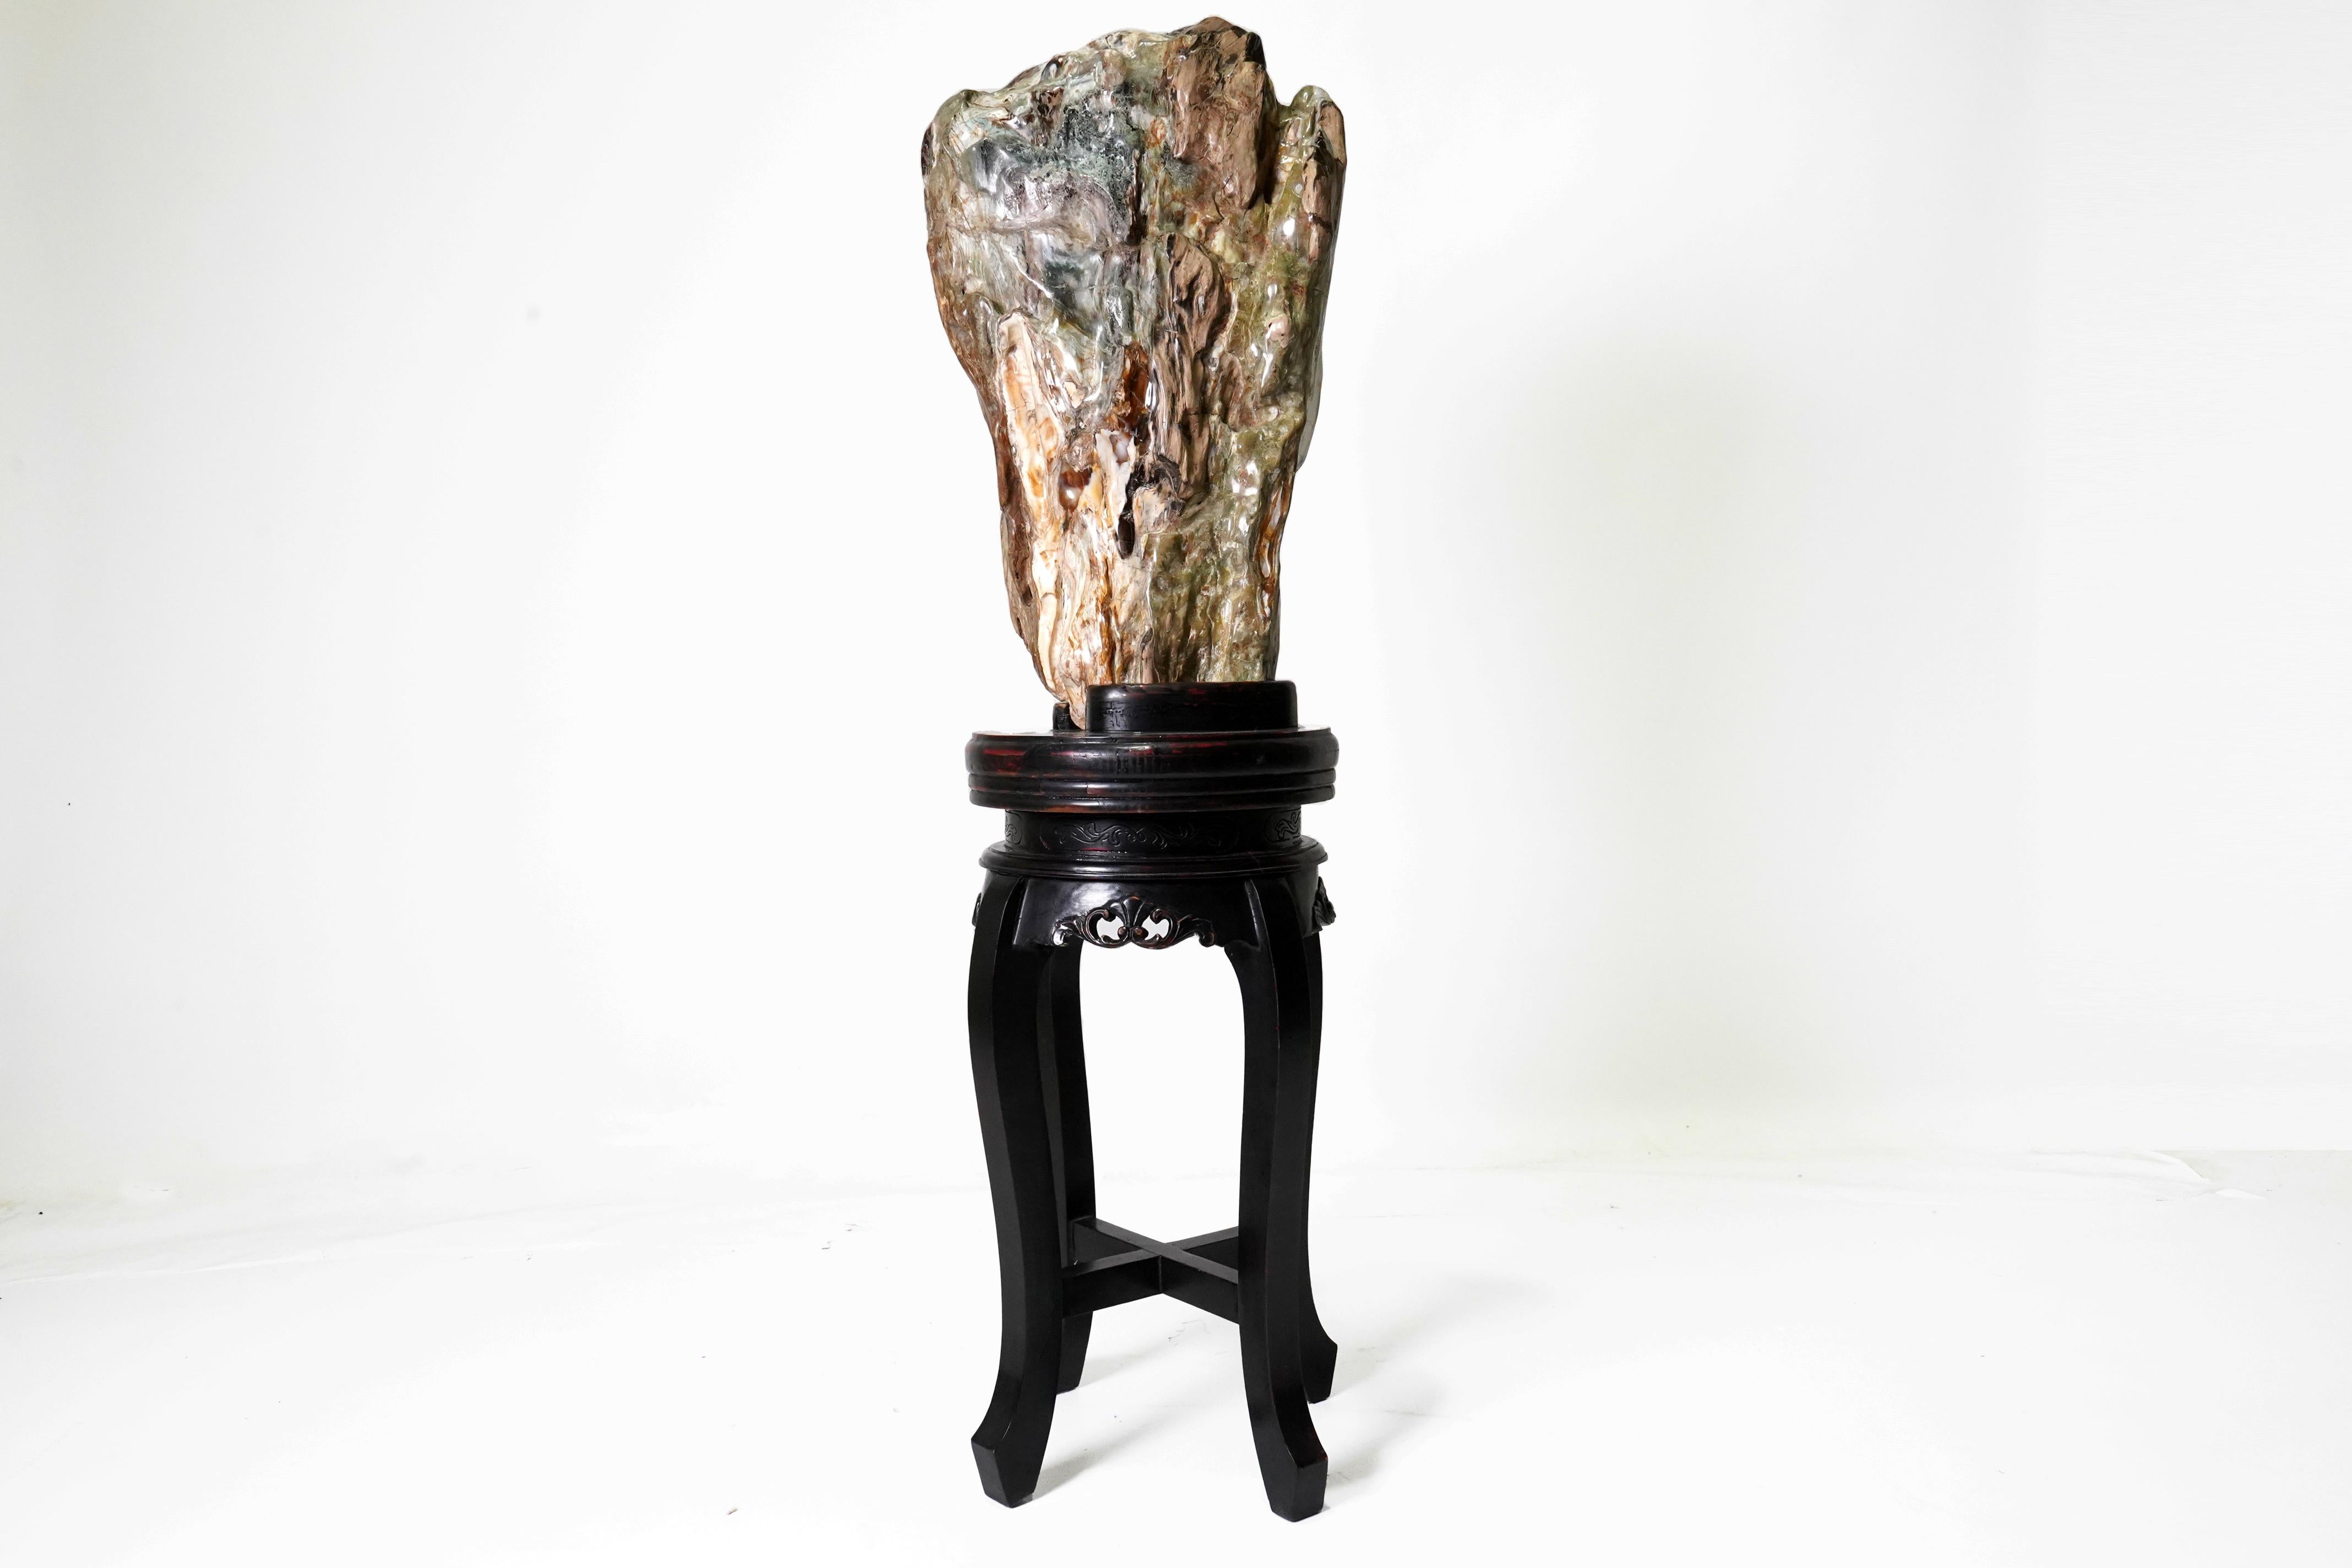 This impressive (and heavy) polished stone resembles a scholar's mountain as depicted in Chinese traditional paintings.  Though it has greenish areas that resemble jade, it is actually a complex colored marble.  The vintage piece has been fitted to